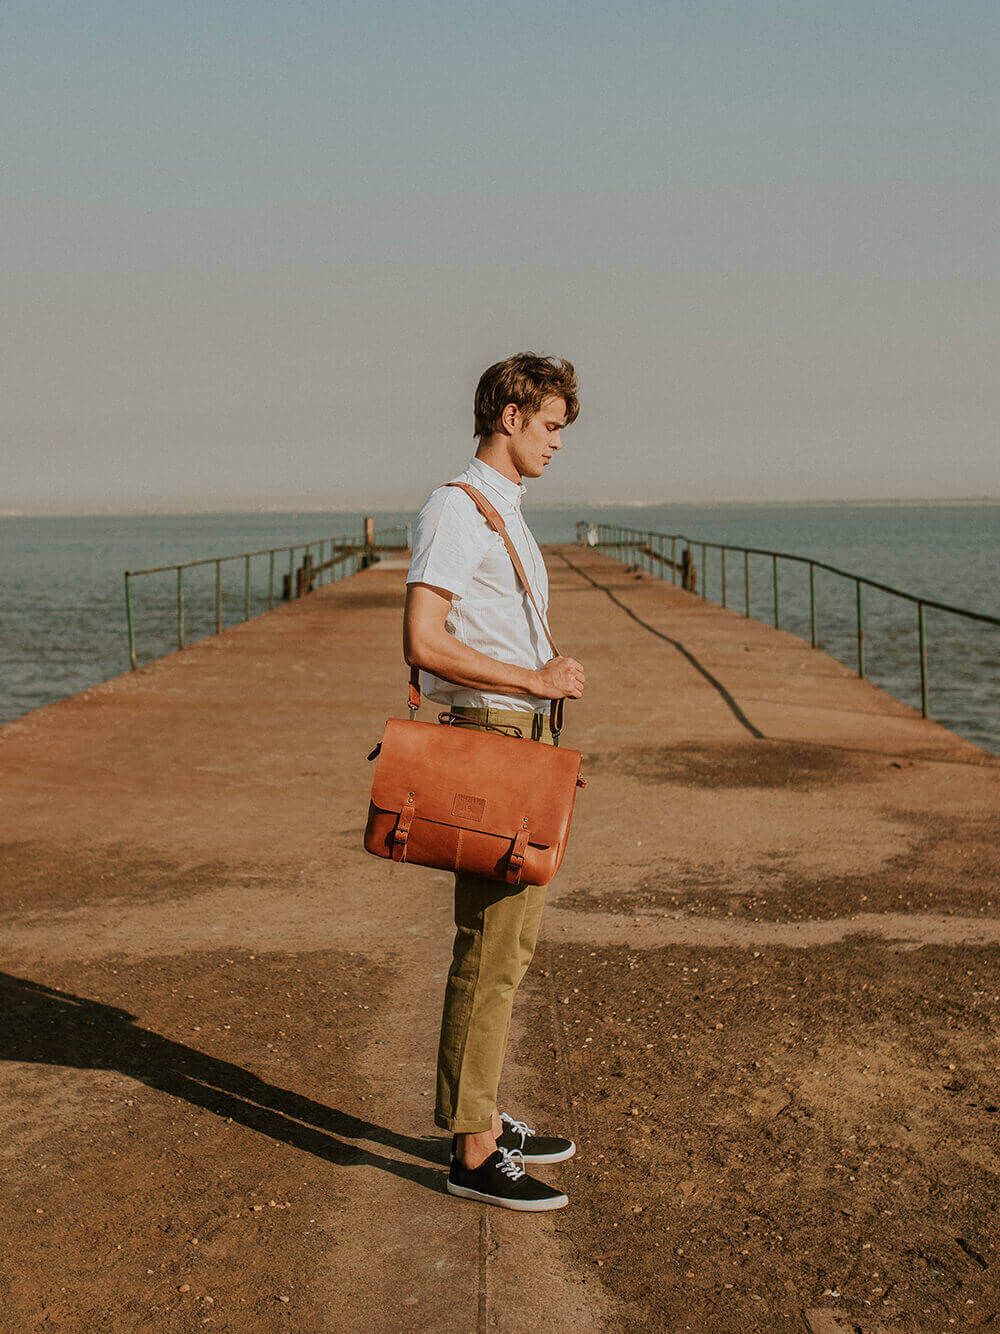 Aire Brown Messenger Bag | Ideal & Co